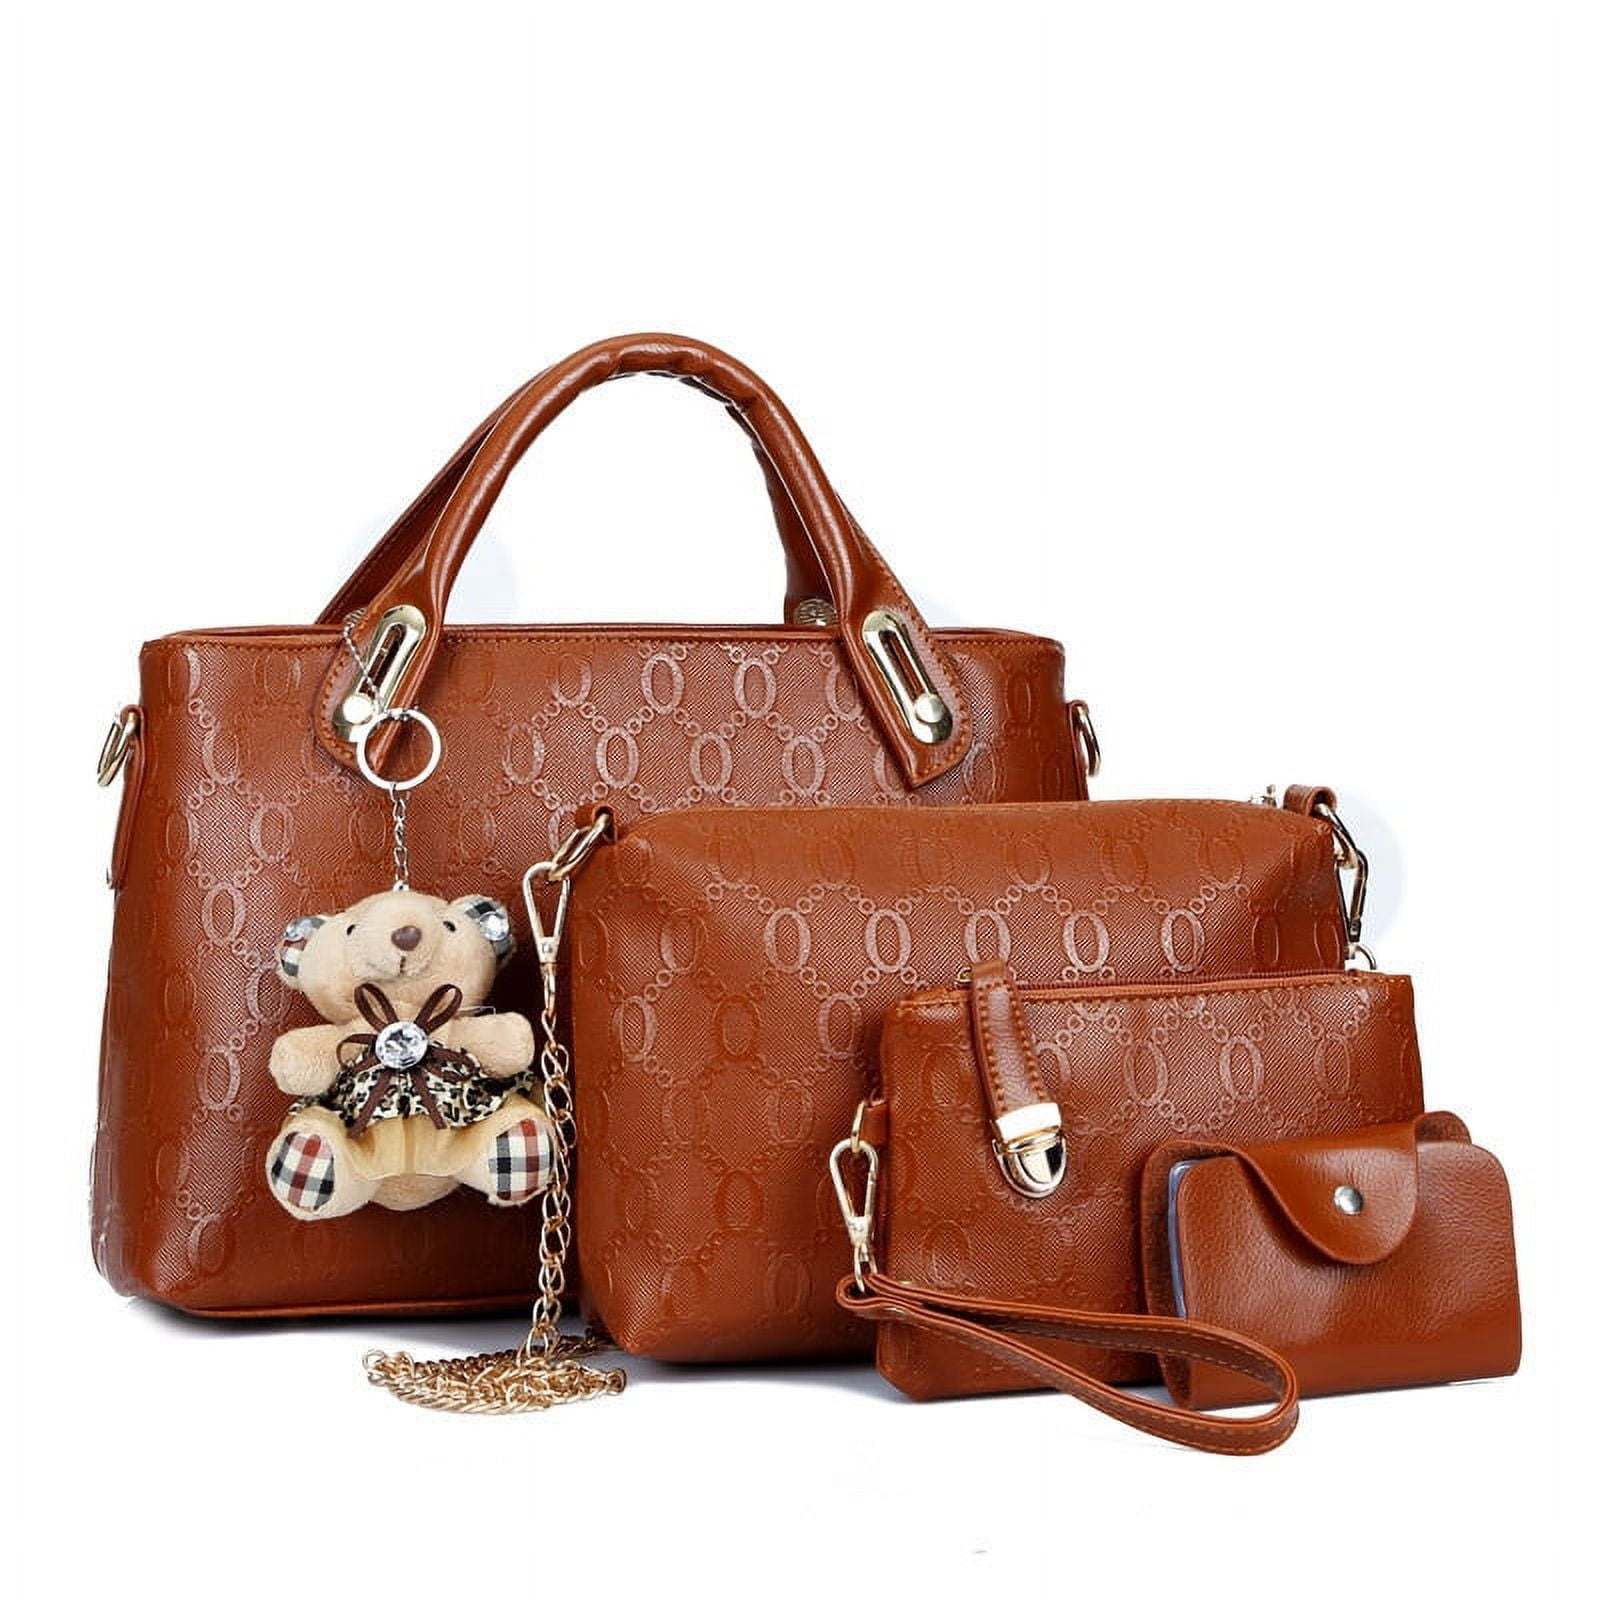 Designer And Fany Look Plain Brown Color Ladies Purse For Daily Use Gender:  Women at Best Price in Hanumana | Bag Collection